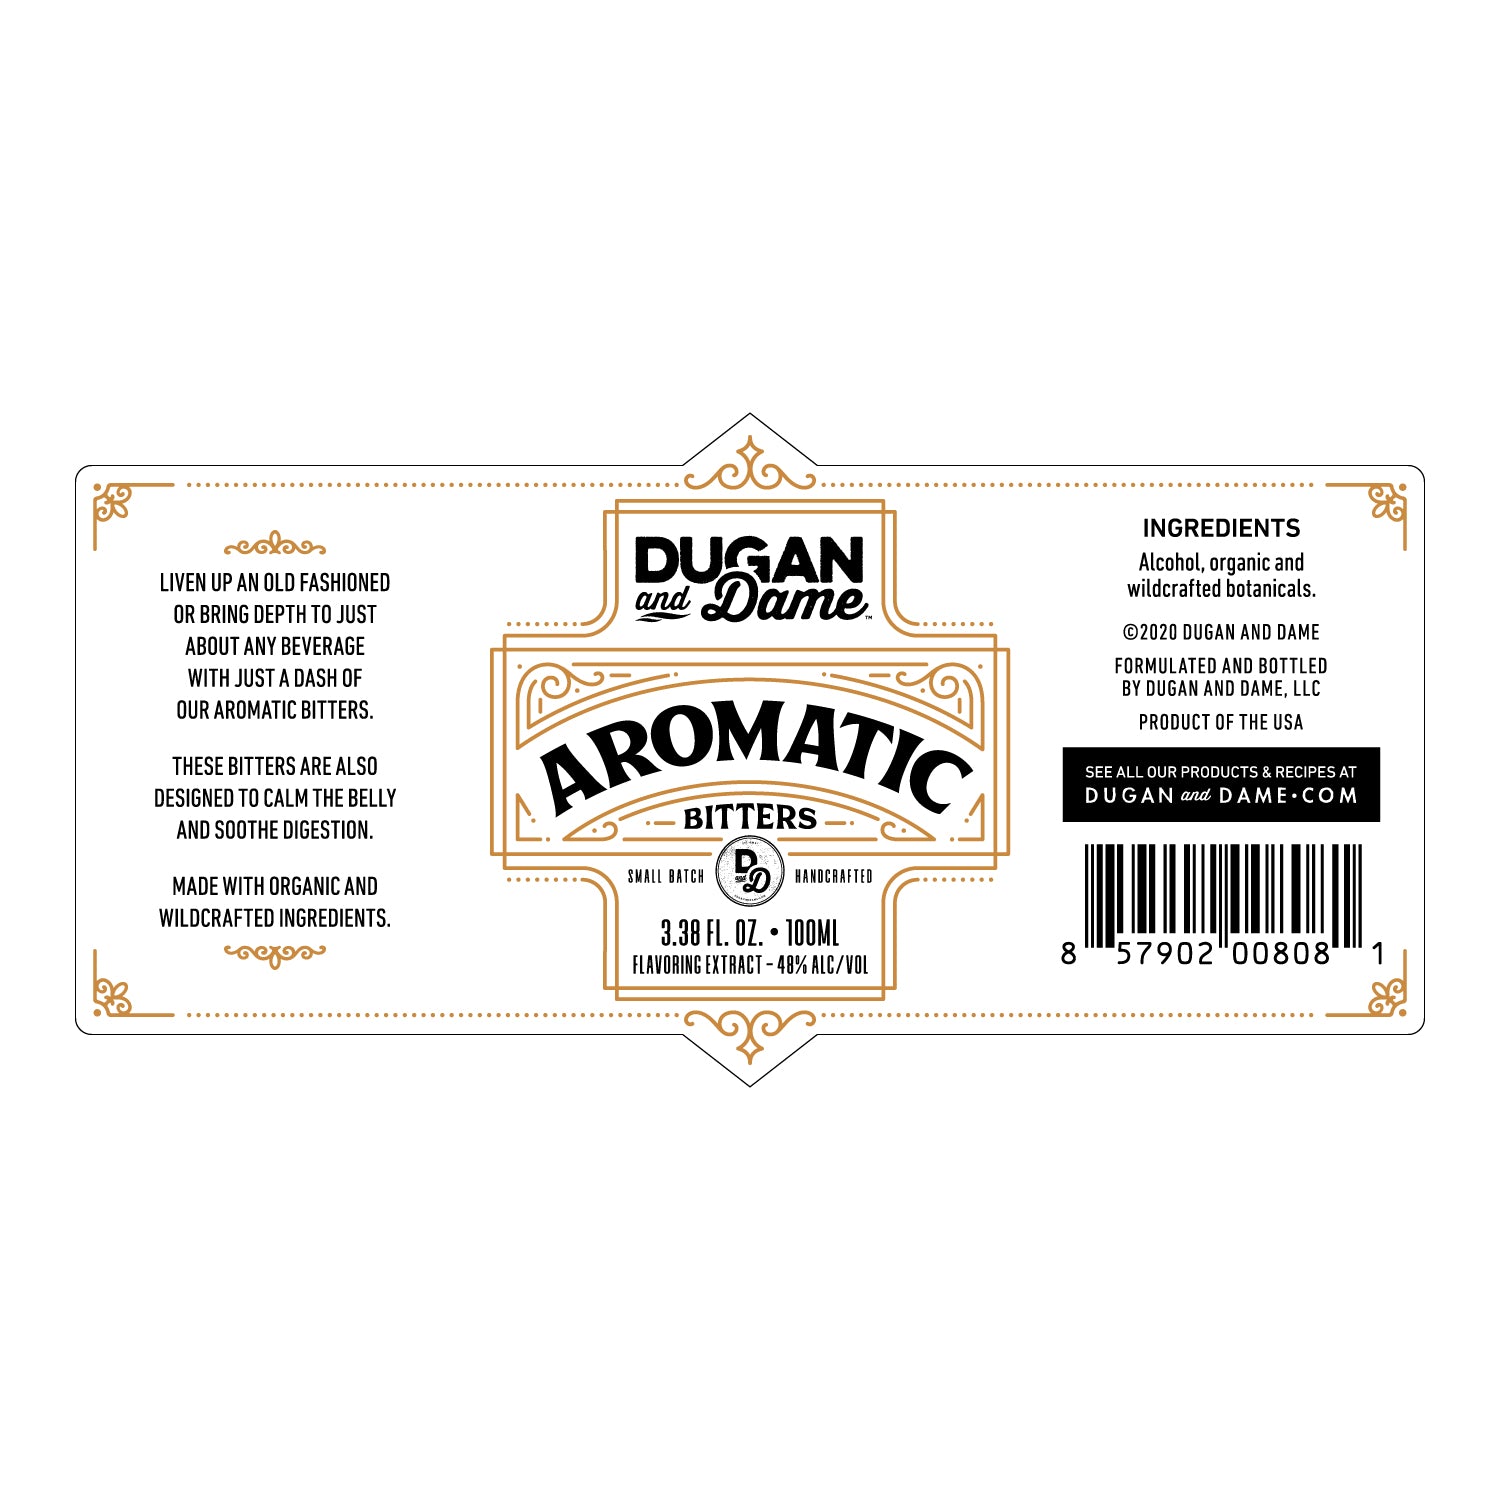 Dugan and Dame Aromatic Bitters Label